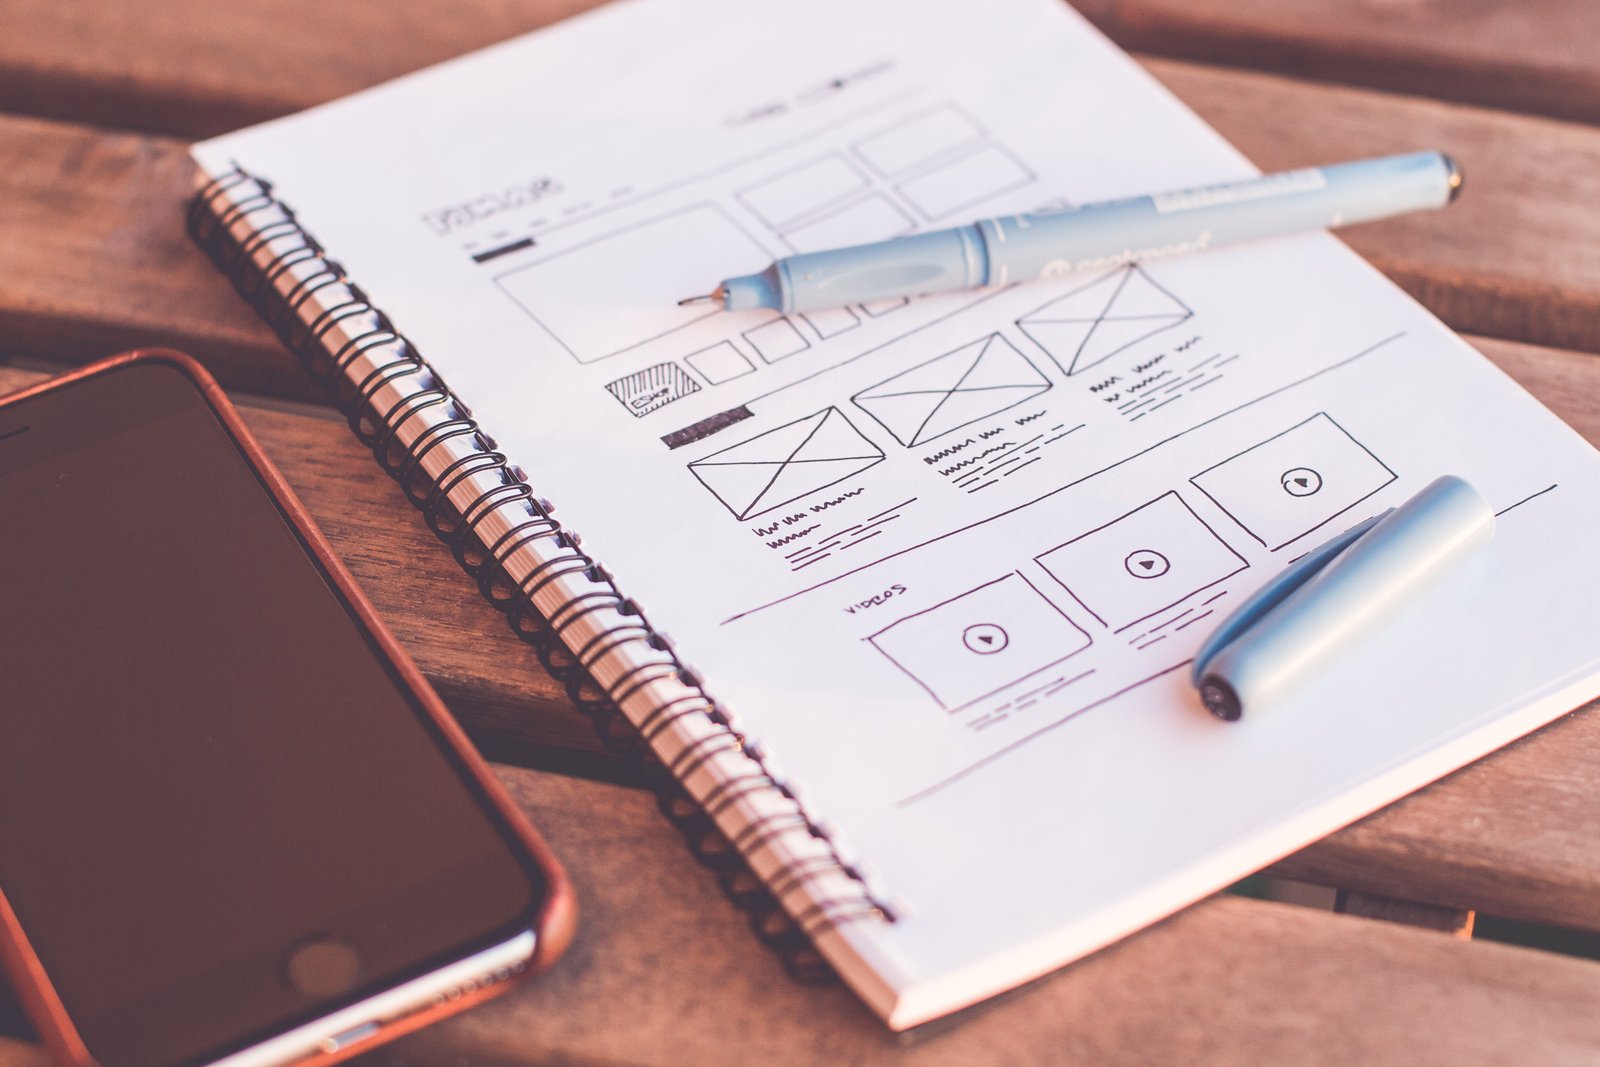 finding the best UX design